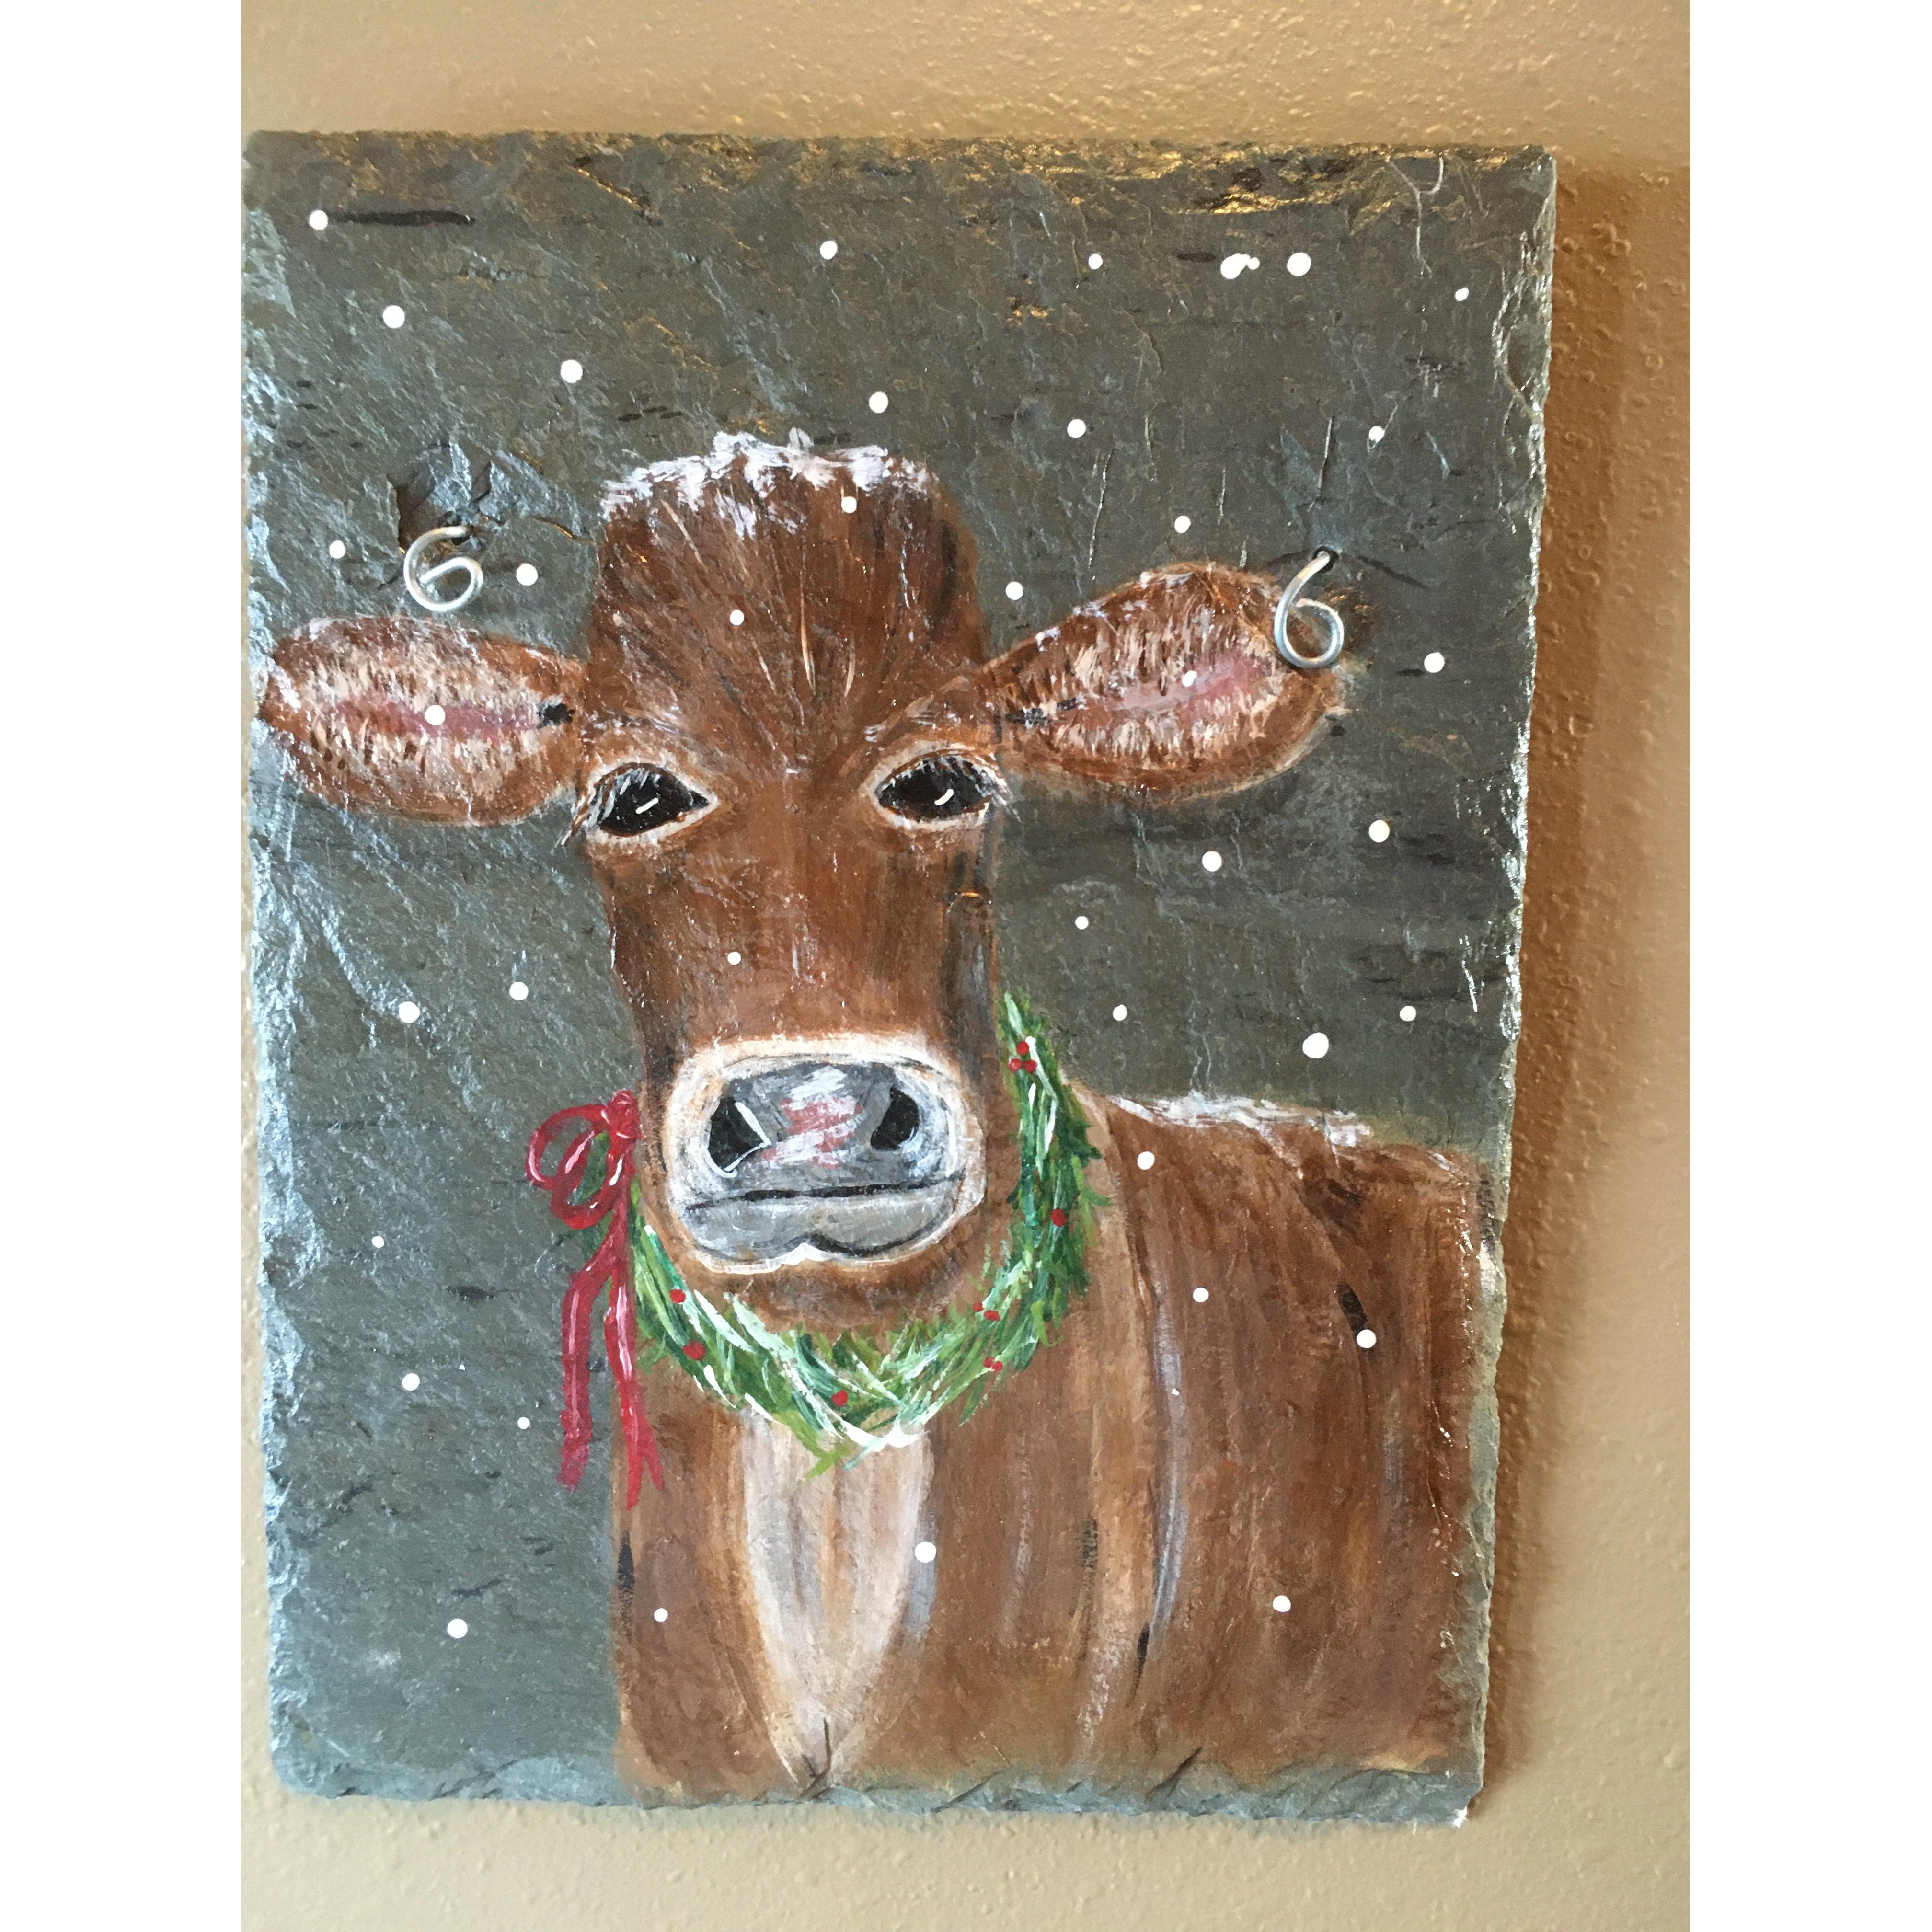 Rustic Farmhouse Holiday Jersey Cow Painted on Slate 9 x 12 inches